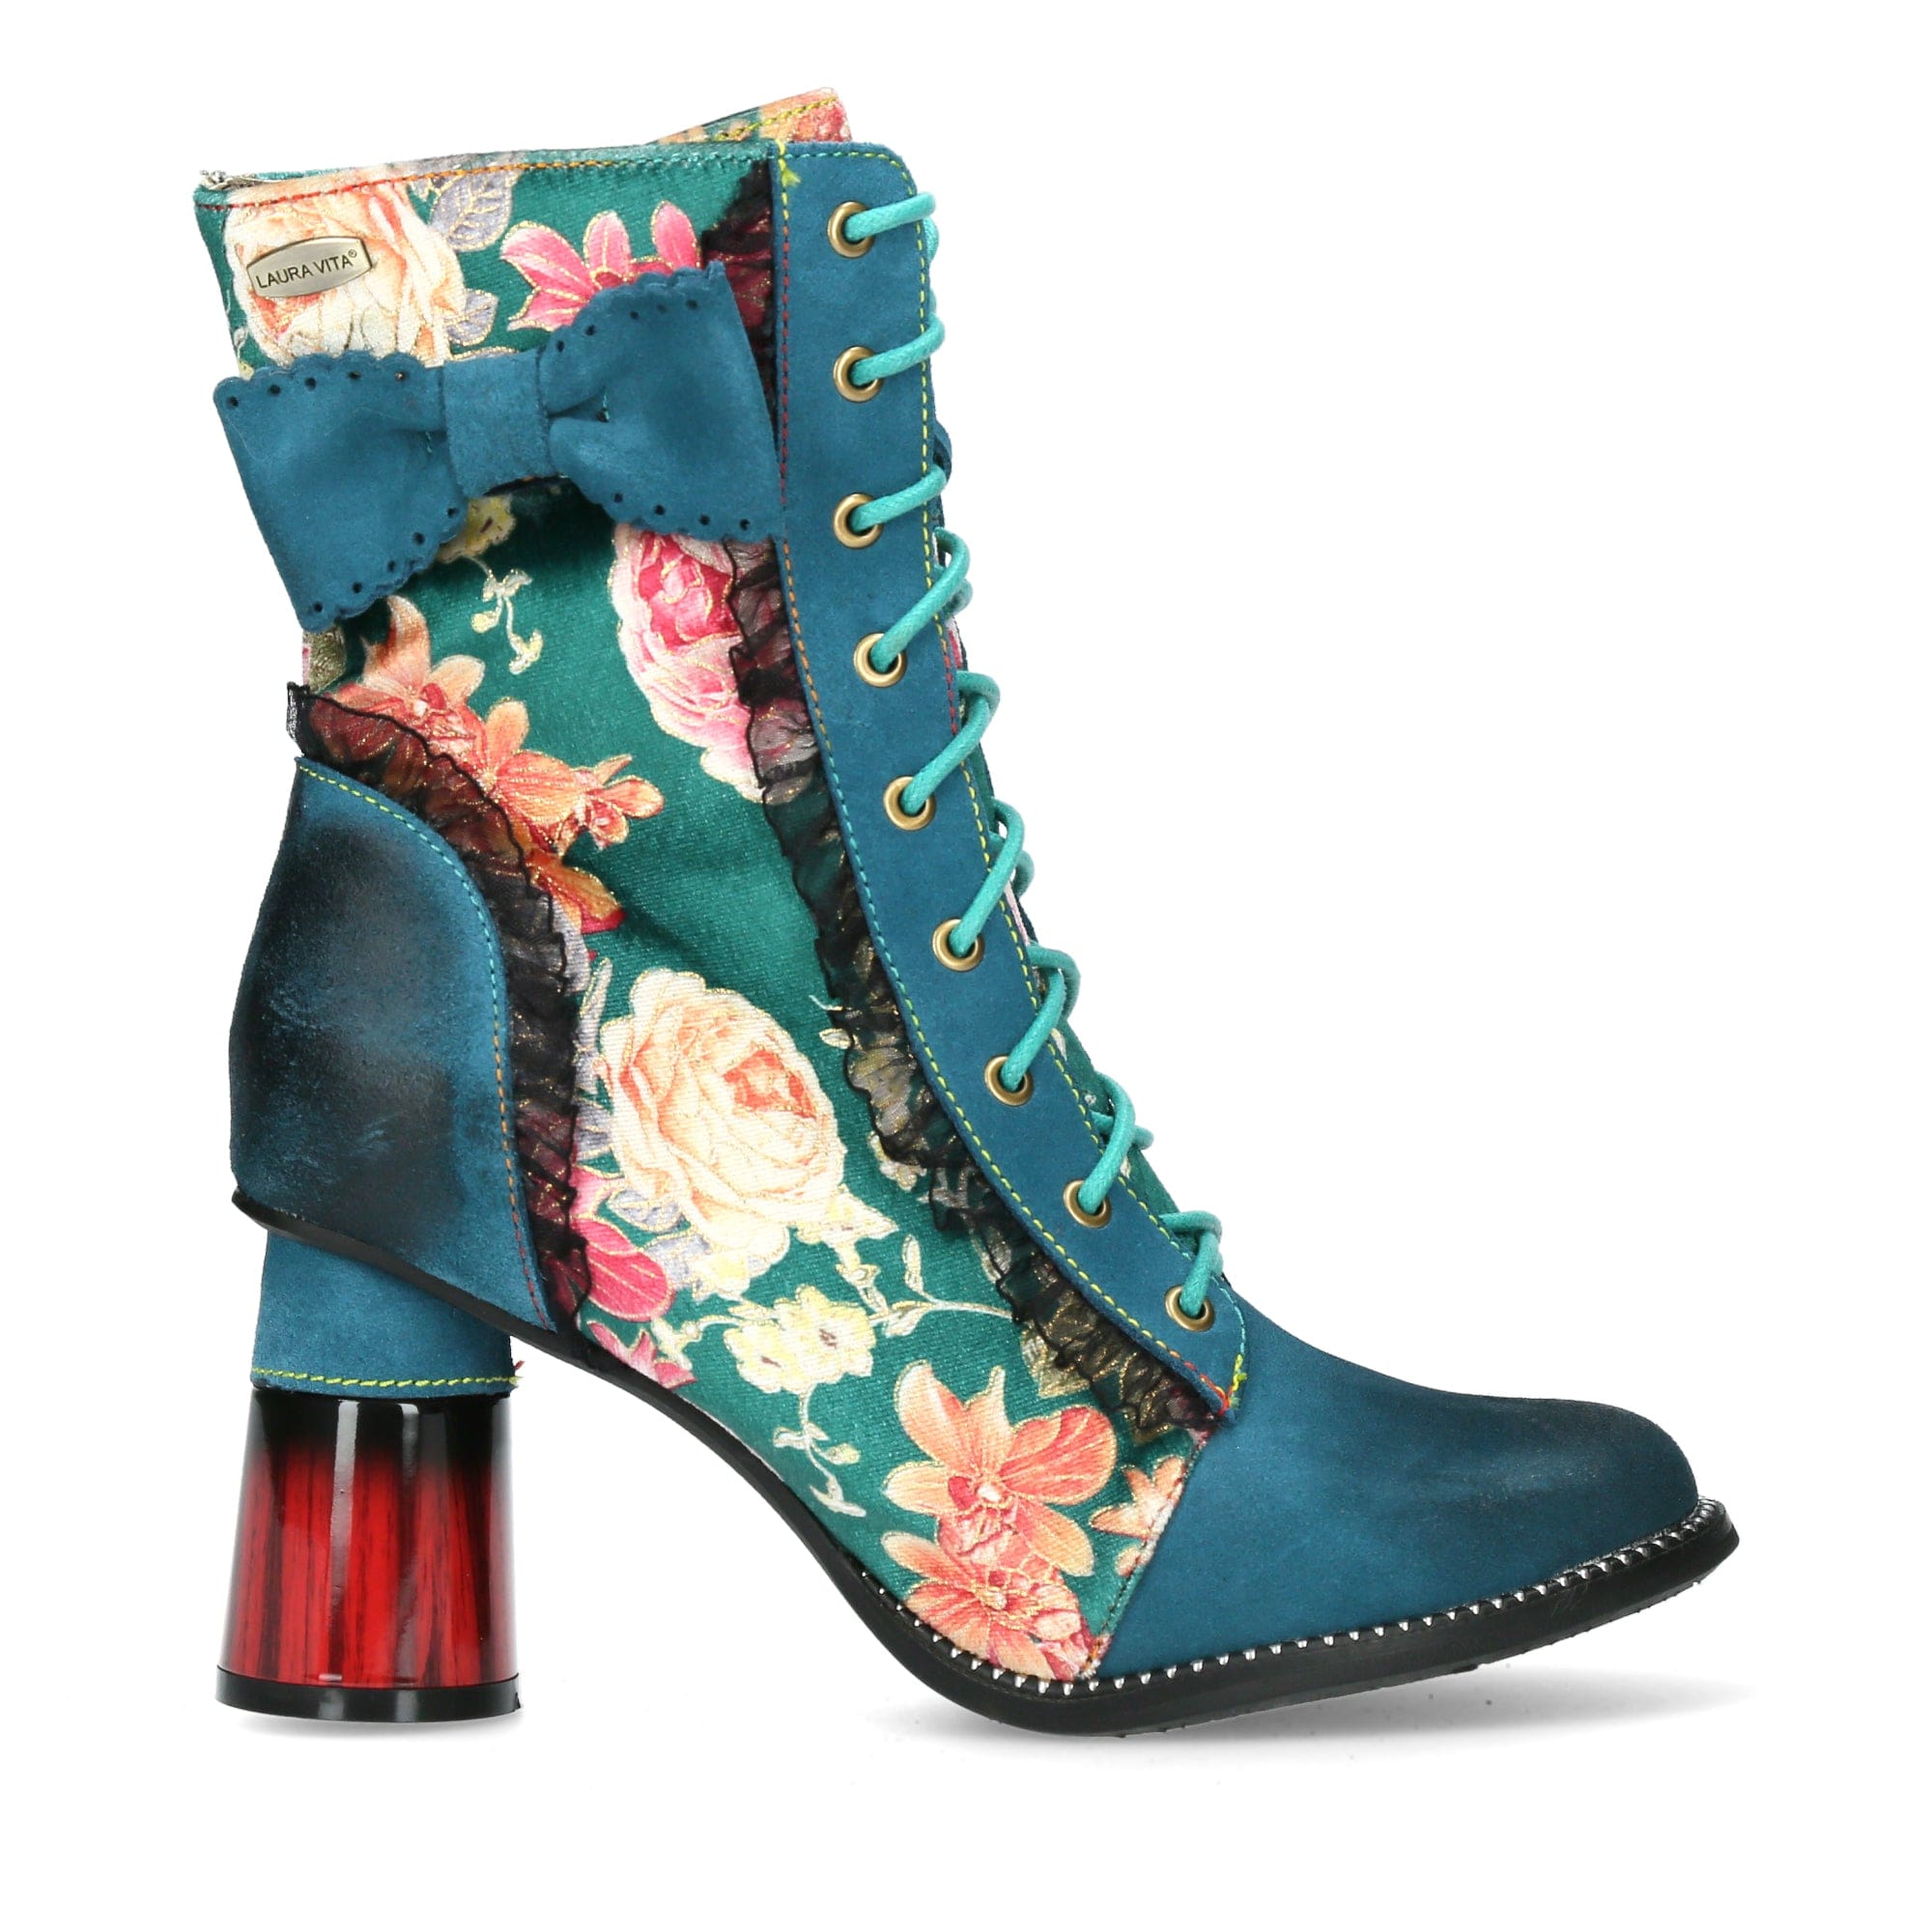 Shoes GUCSTOO 1123 - 35 / Turquoise - Boots